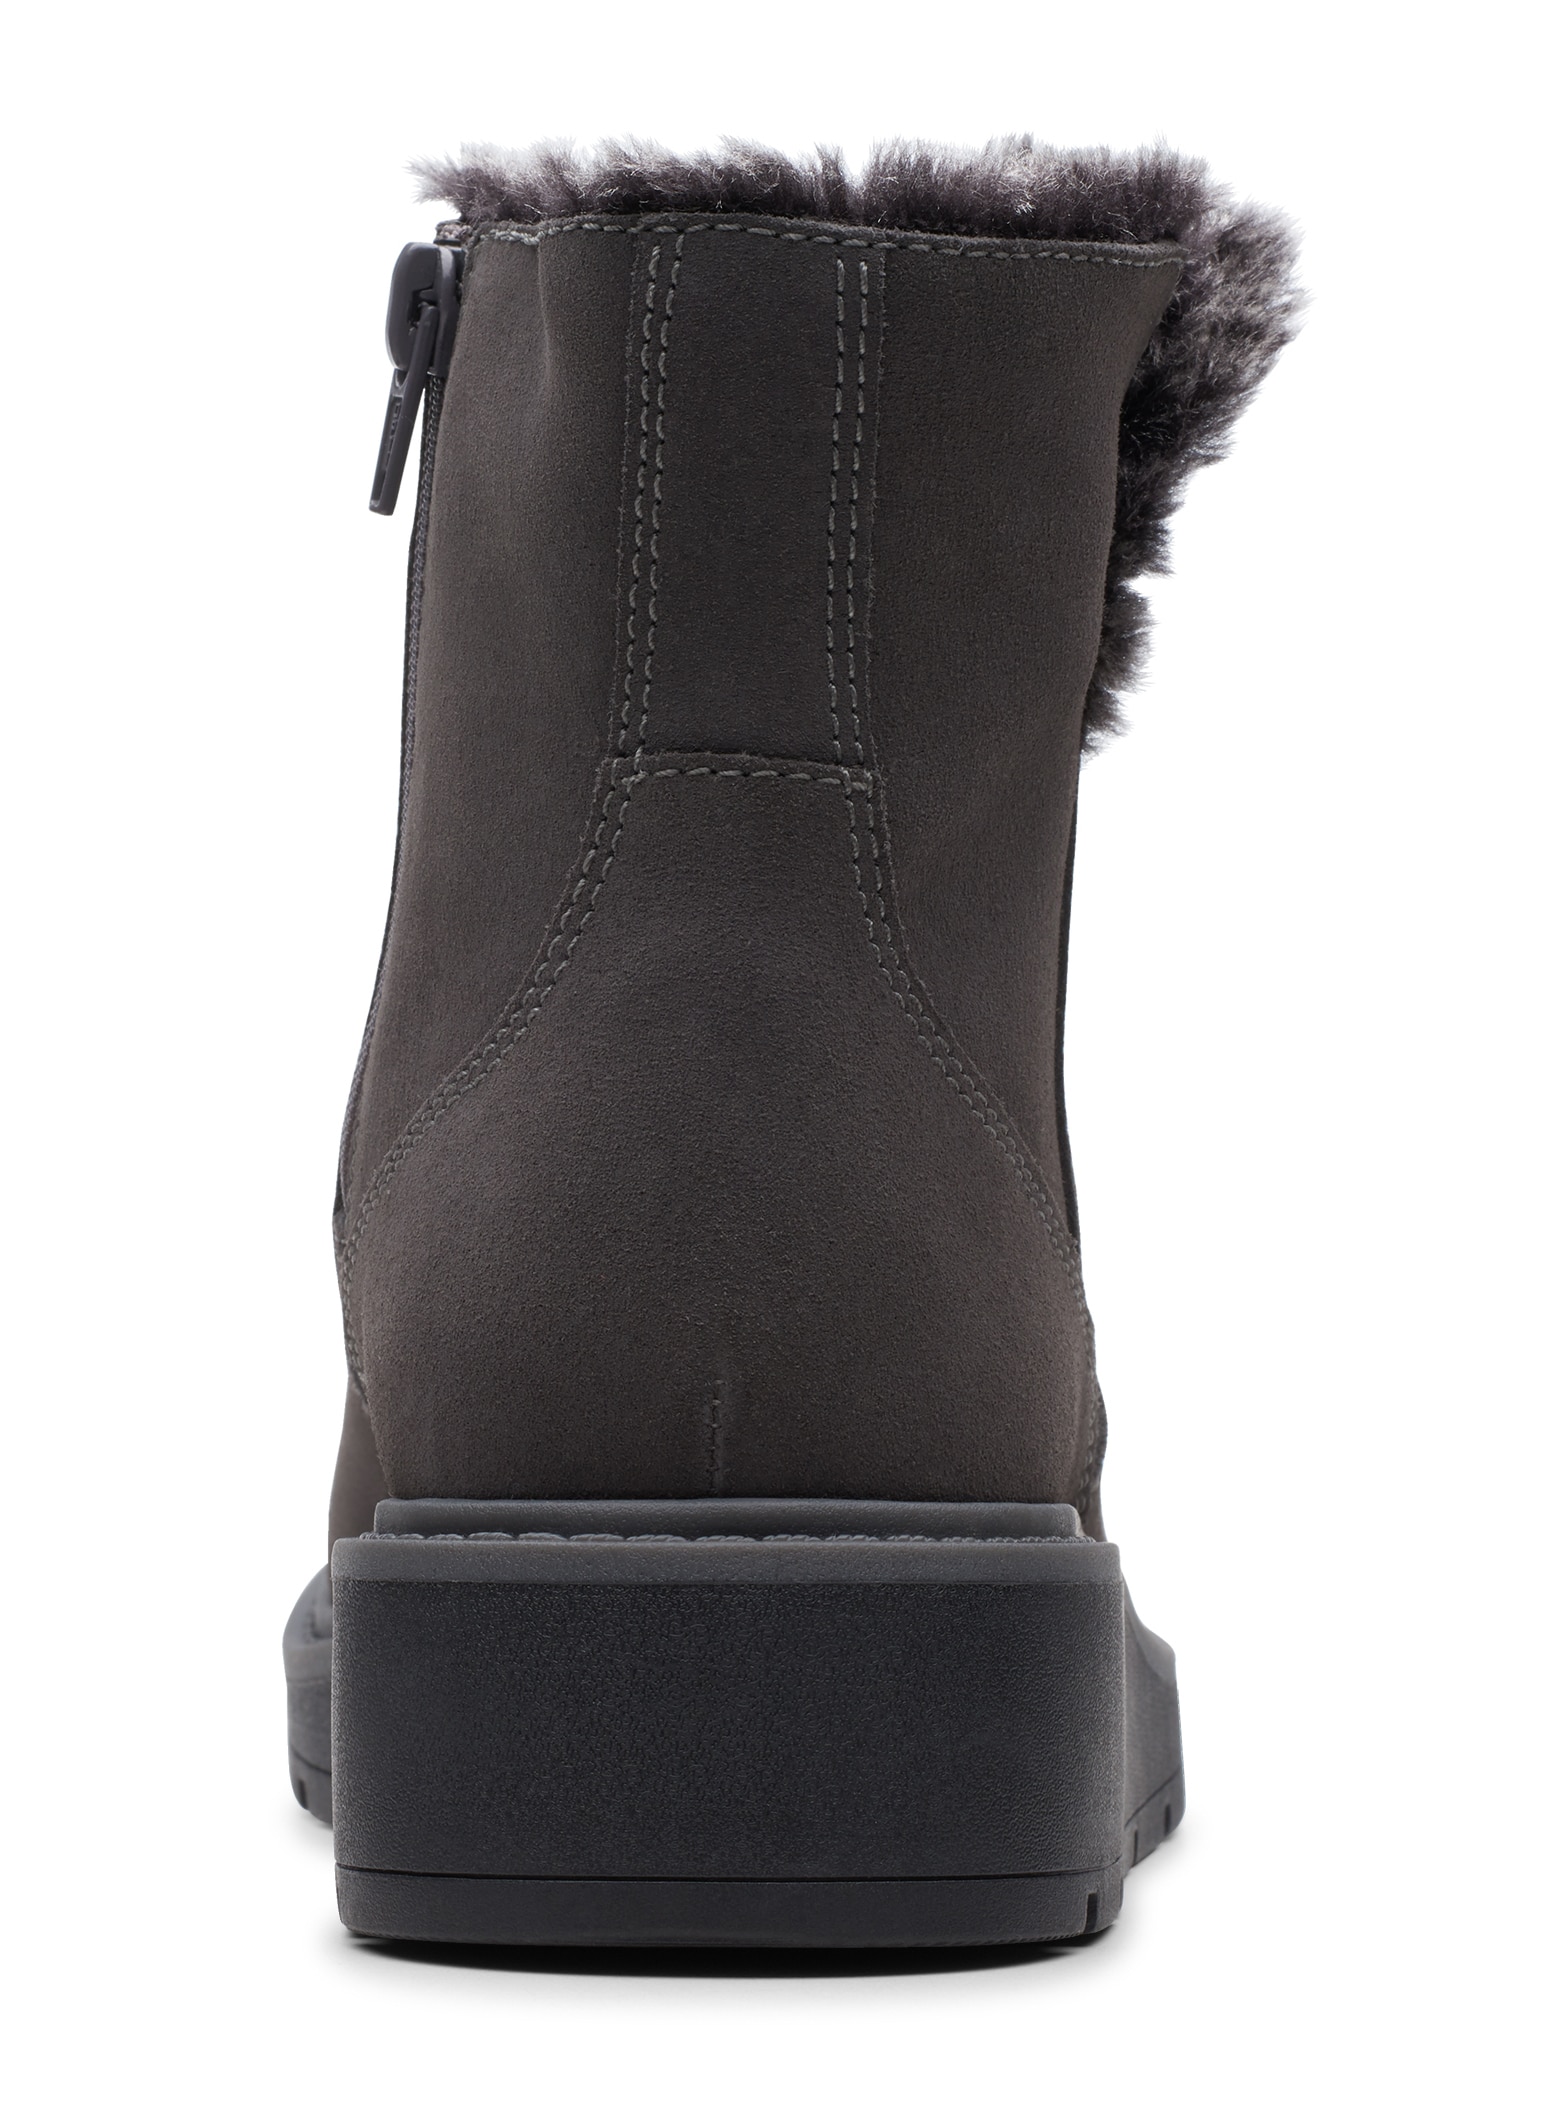 clarks warm lined boots